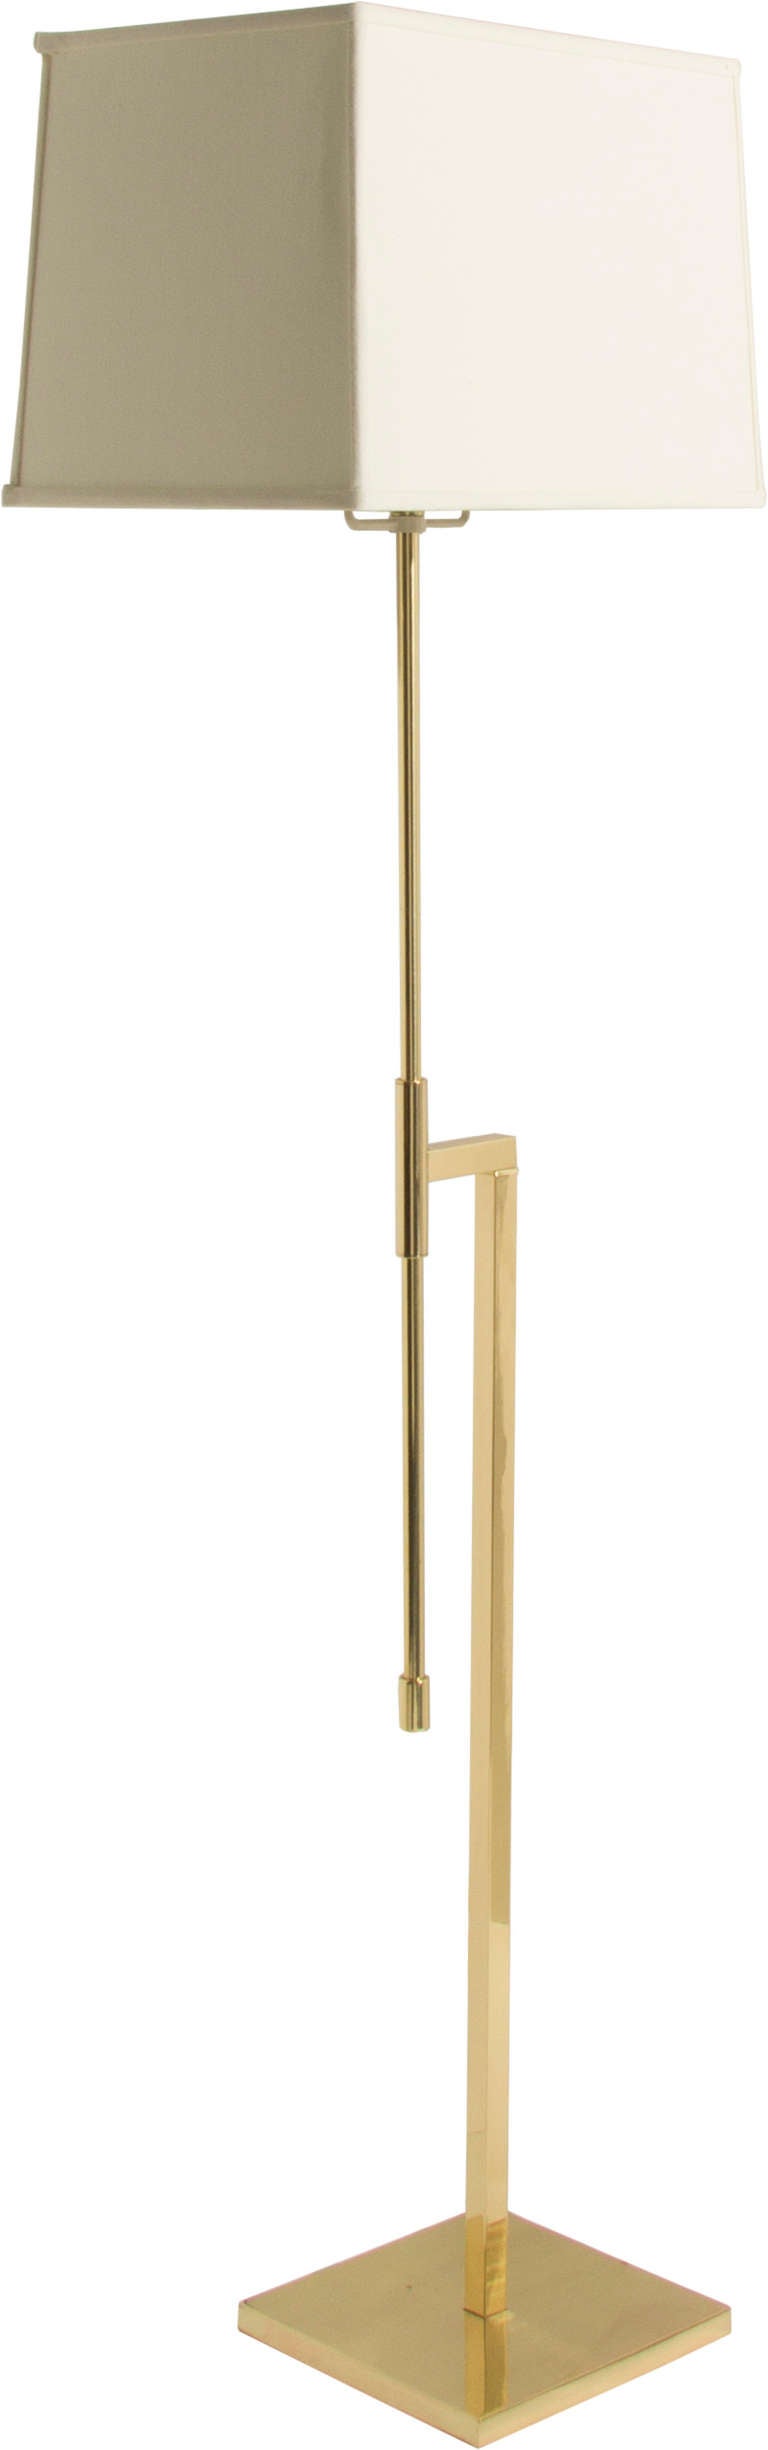 This handsome pair of floor lamps are extendable up to a maximum height of 66 1/2